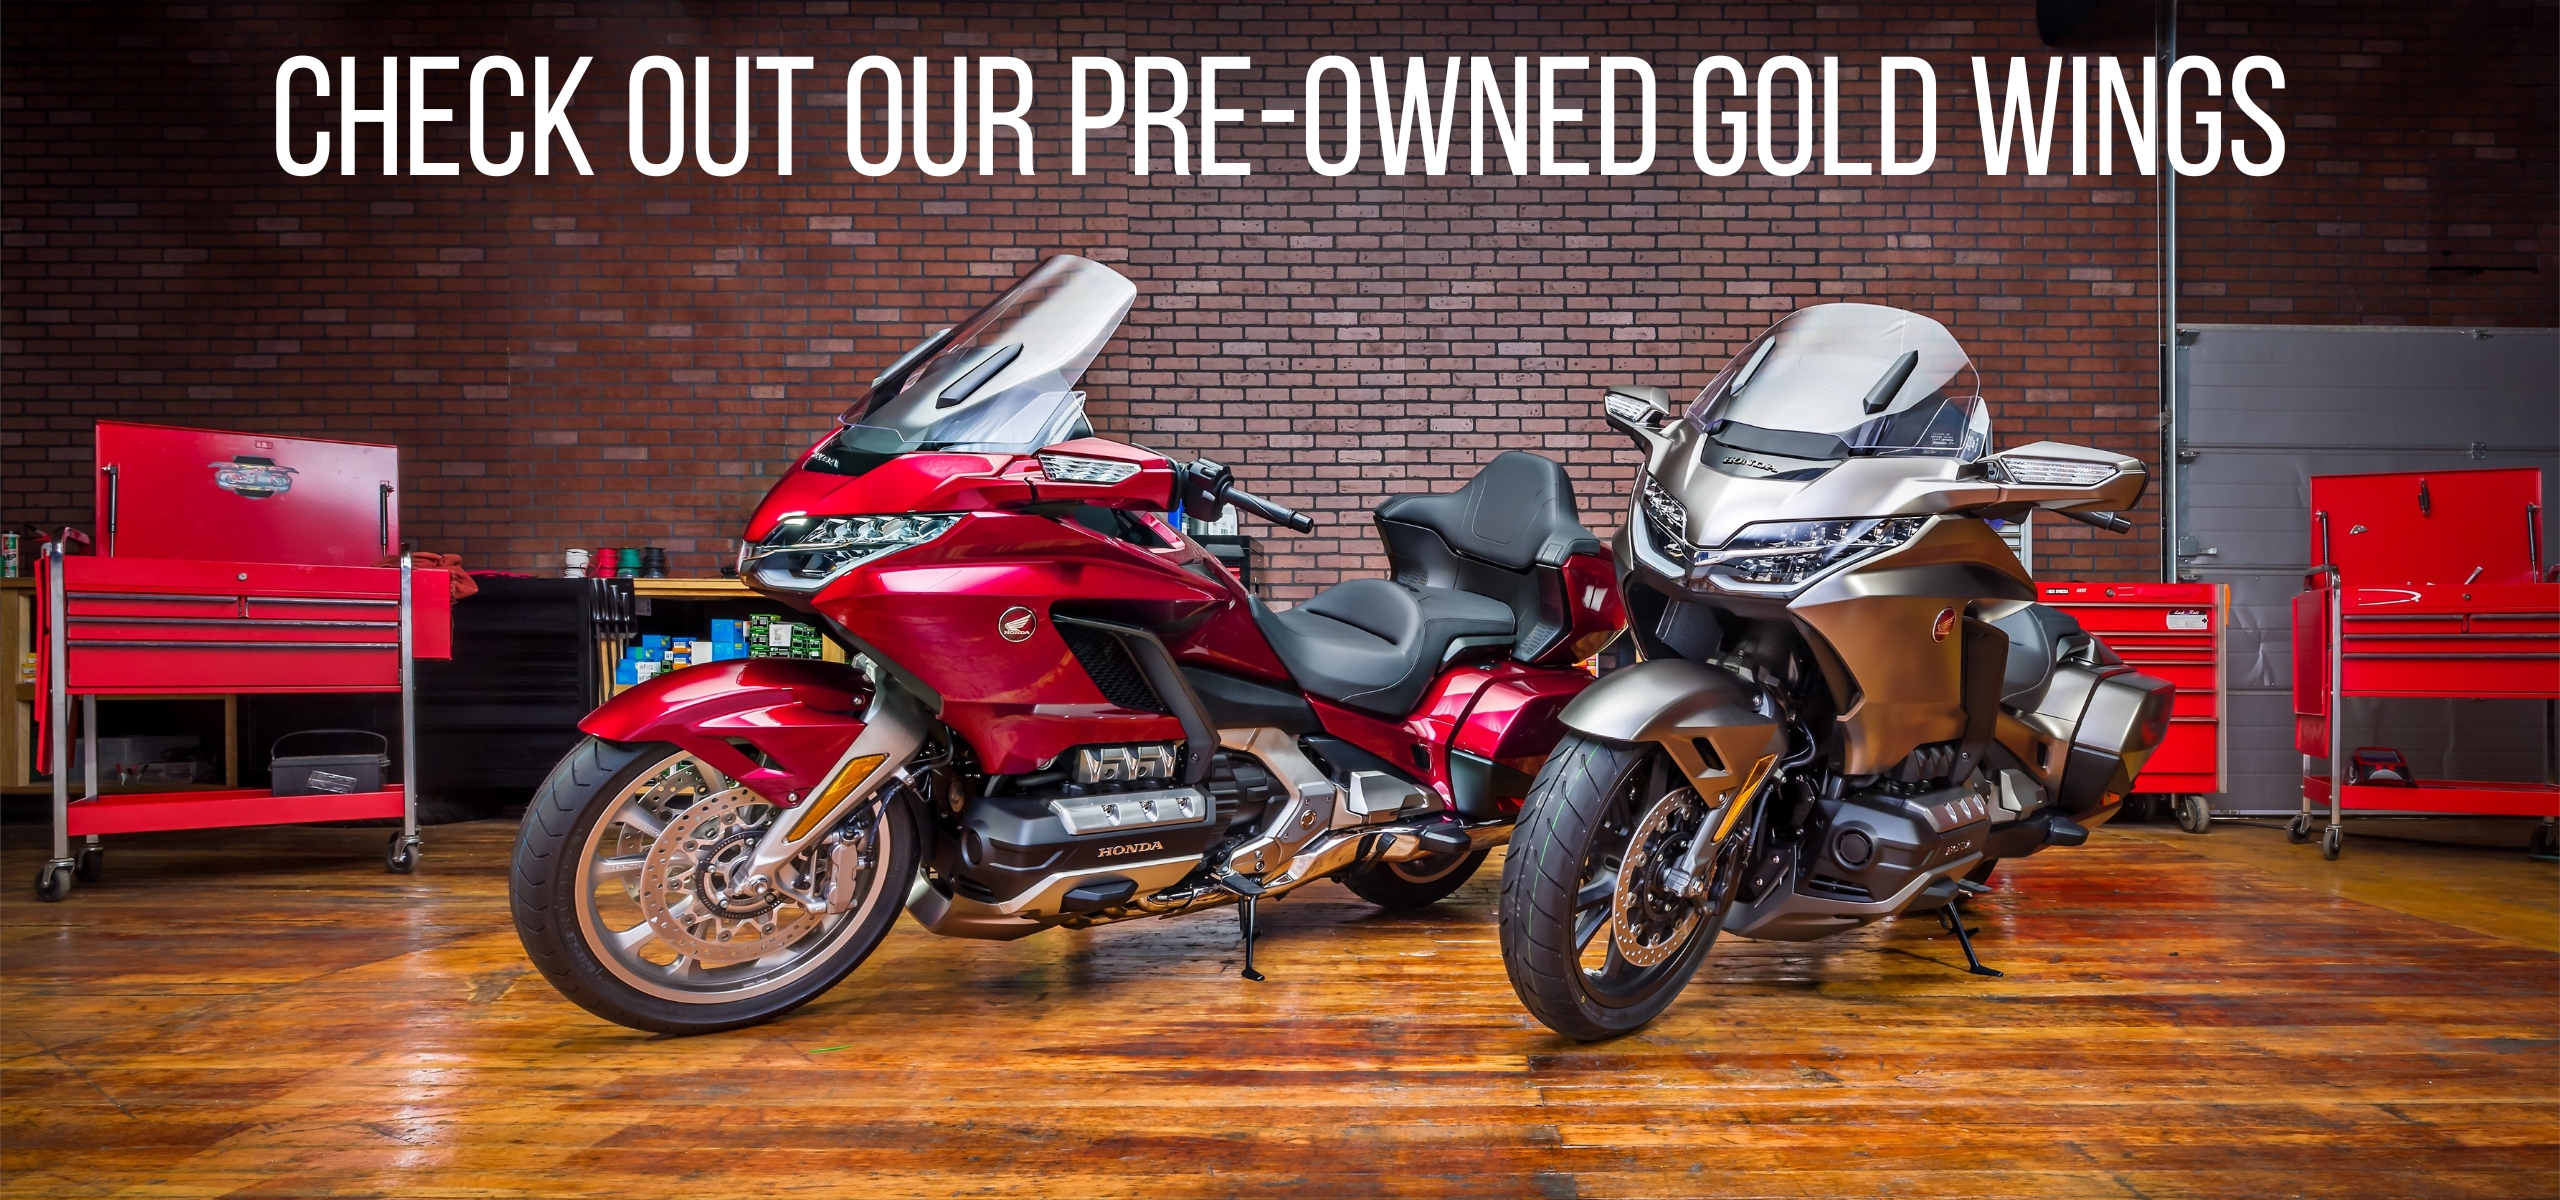 Gold Wing Used Bikes